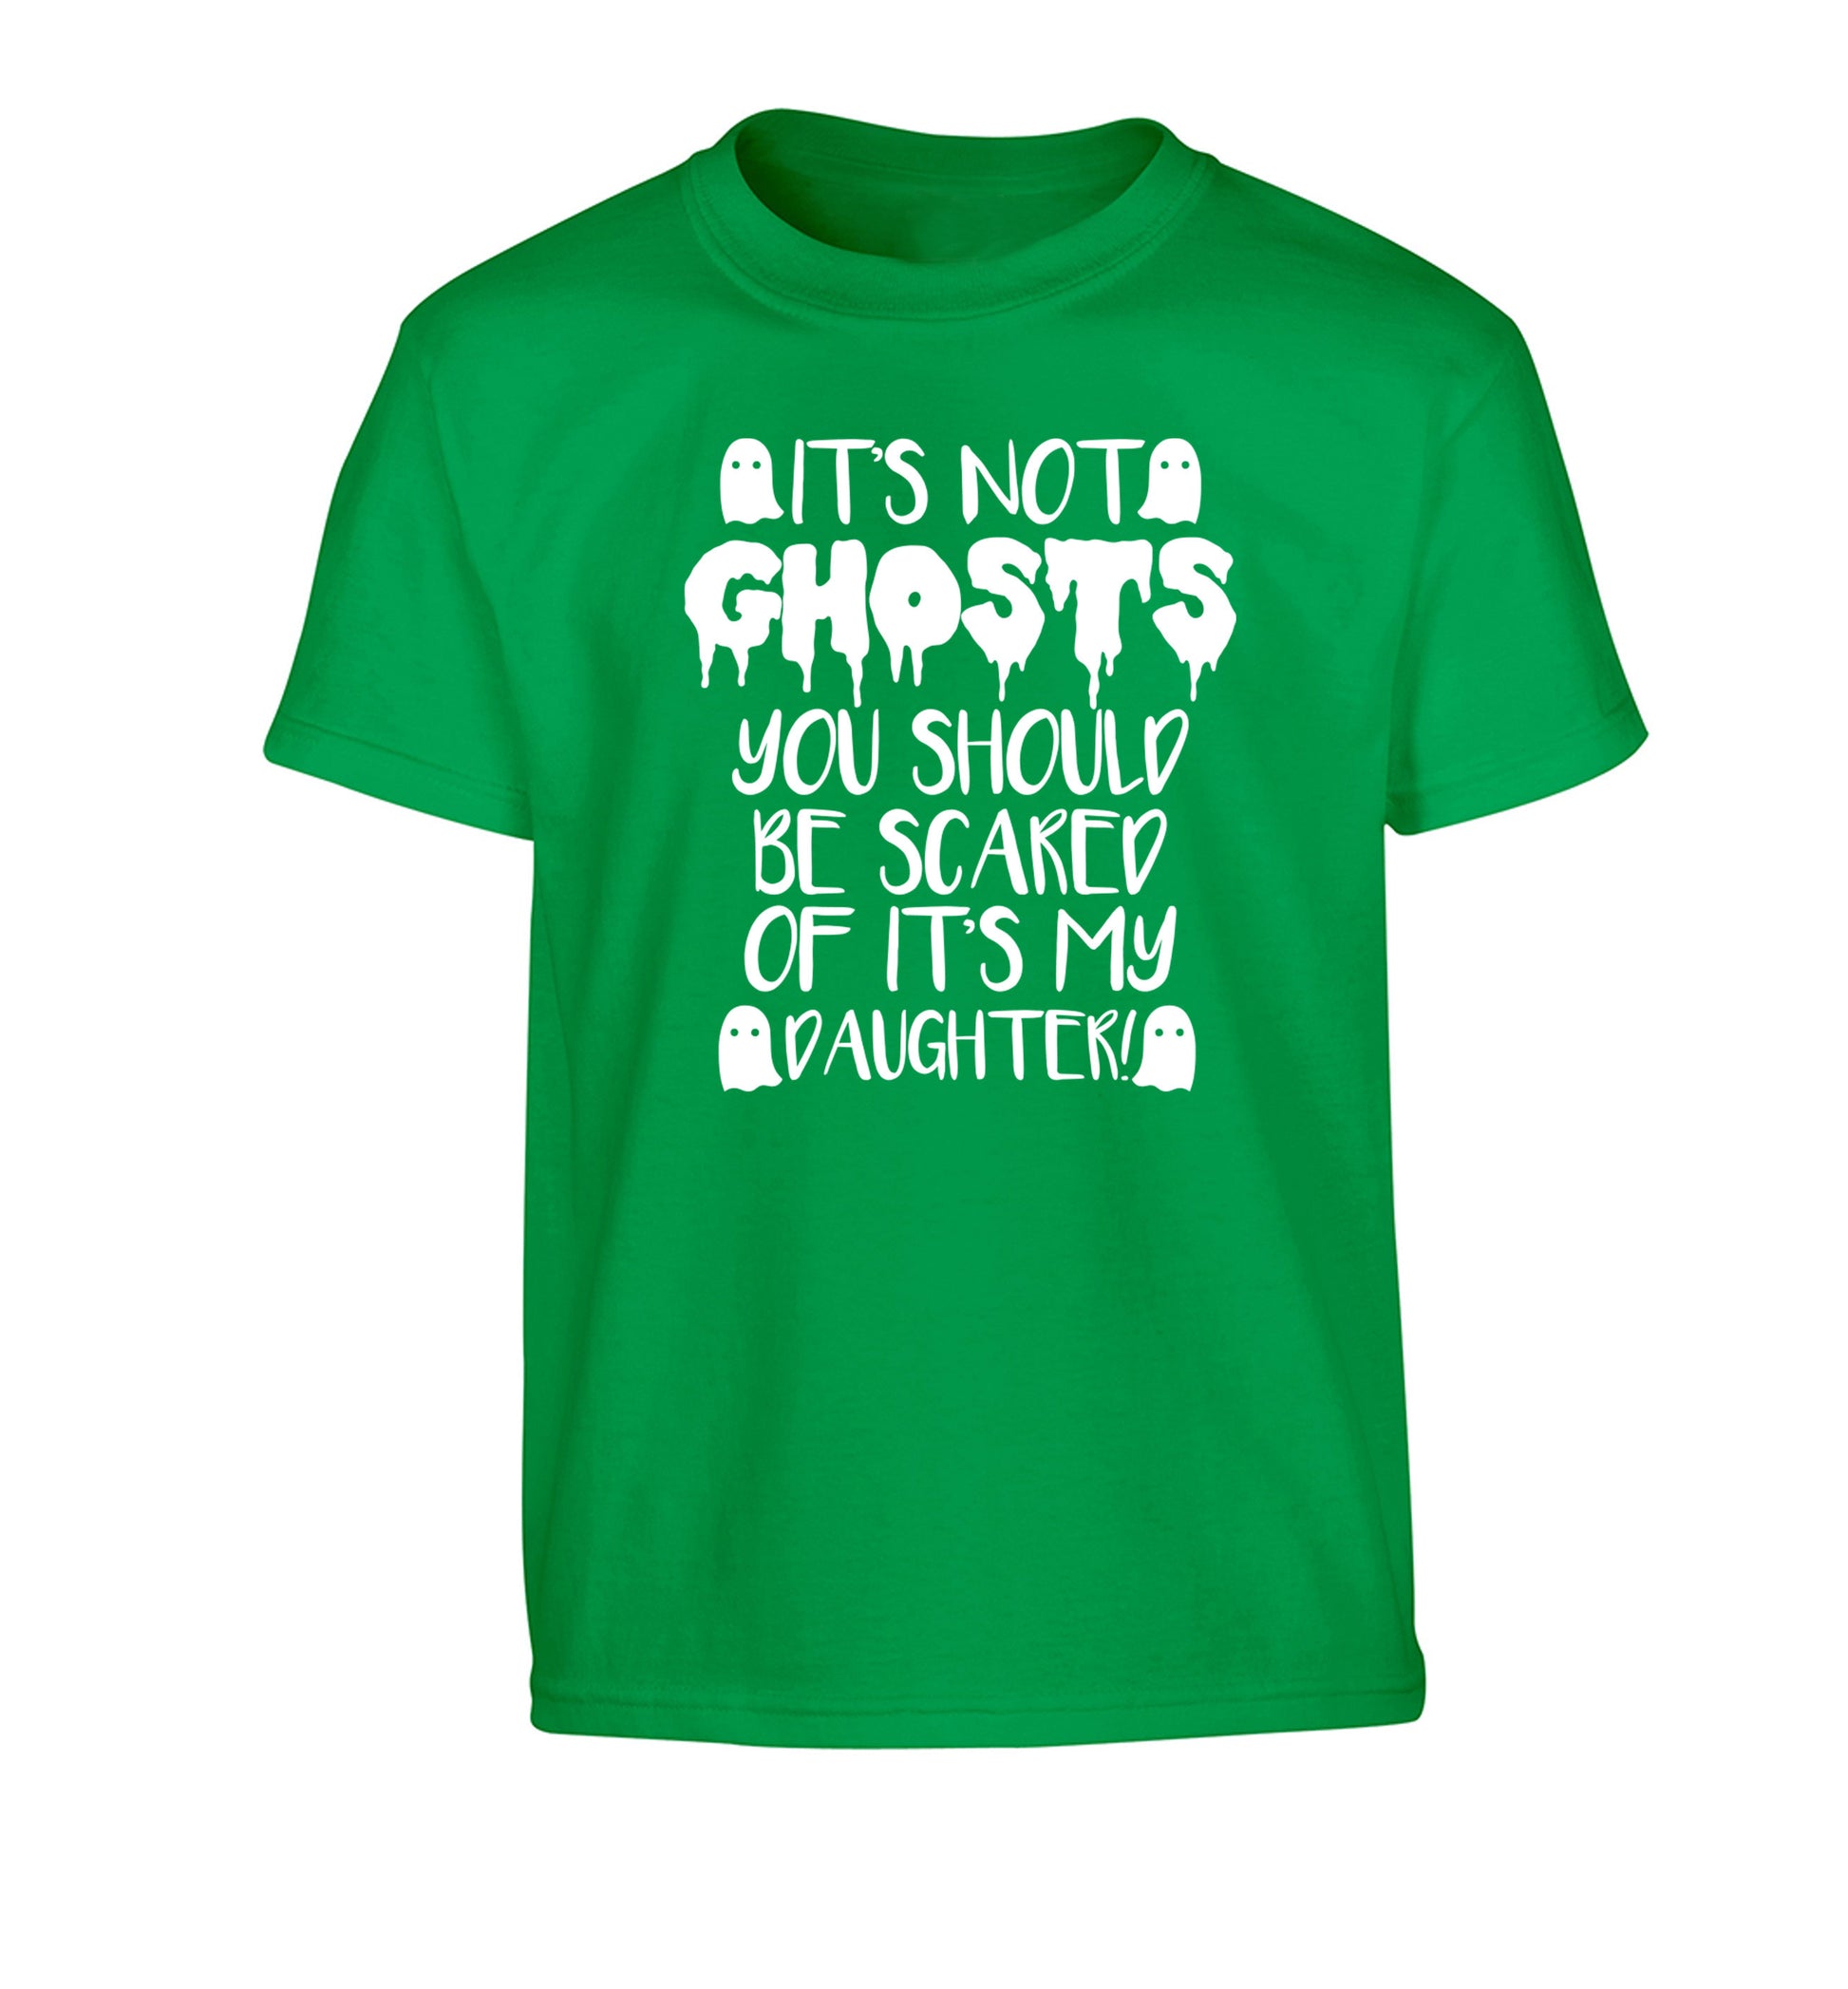 It's not ghosts you should be scared of it's my daughter! Children's green Tshirt 12-14 Years